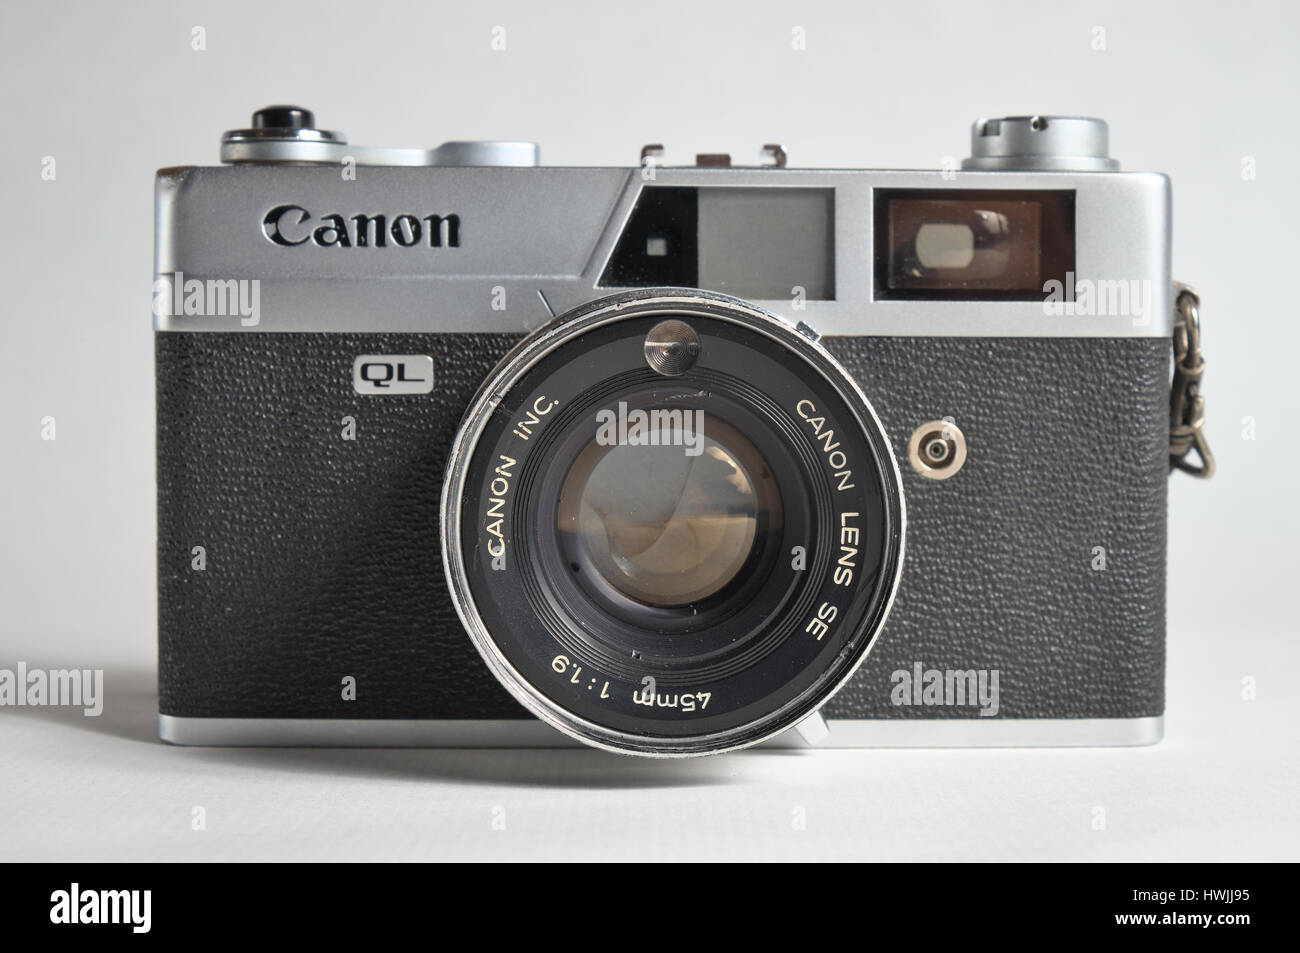 Old Canon analogue camera, model Canonet QL19. 35mm film compact camera,  with 45mm Canon lens lens f/1.9 Stock Photo - Alamy